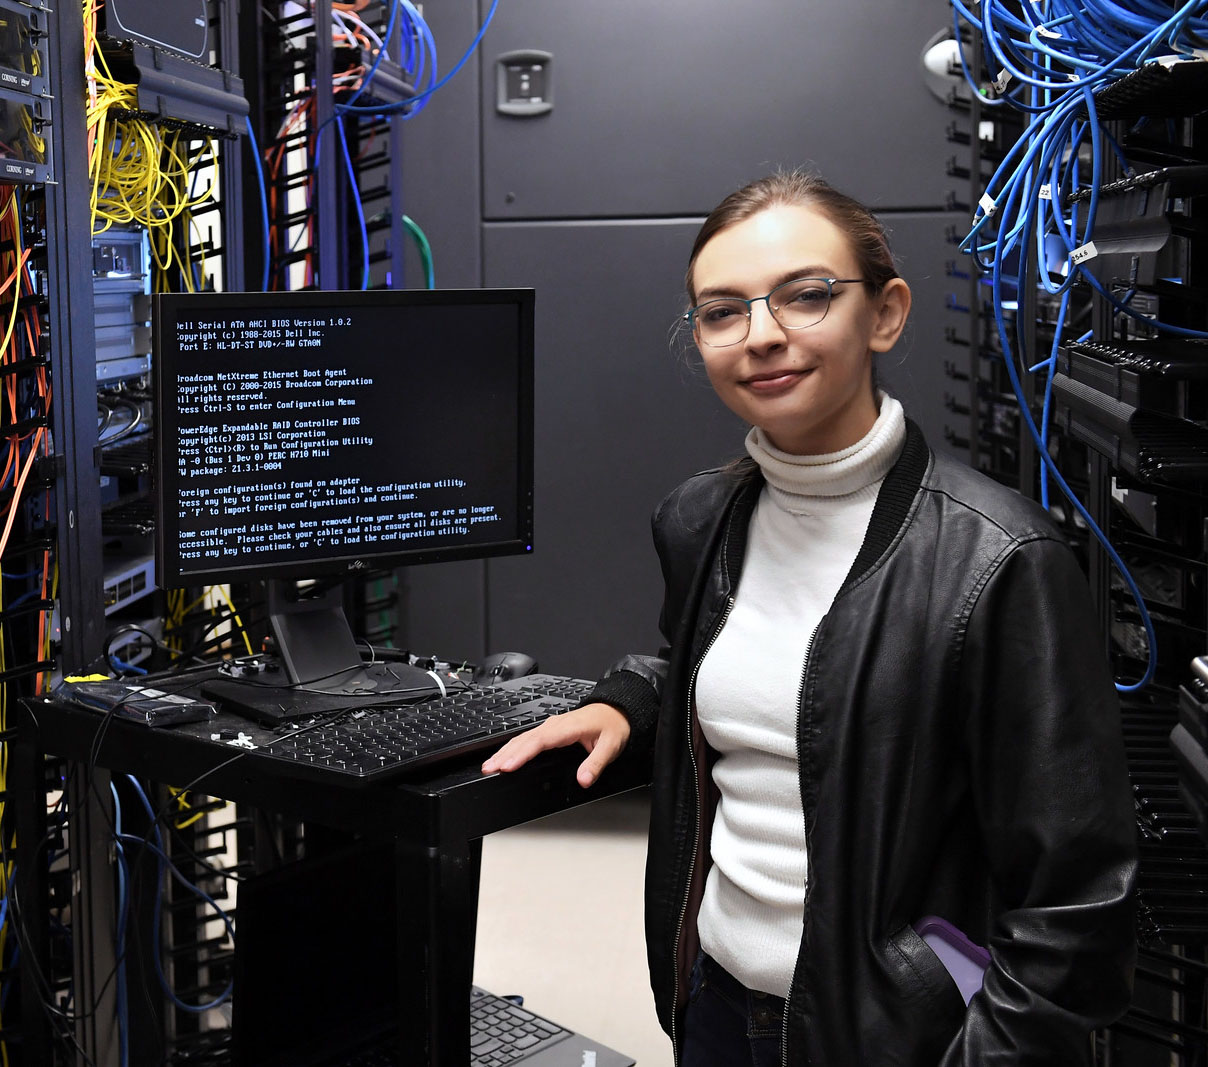 RCSJ student in a computer server room